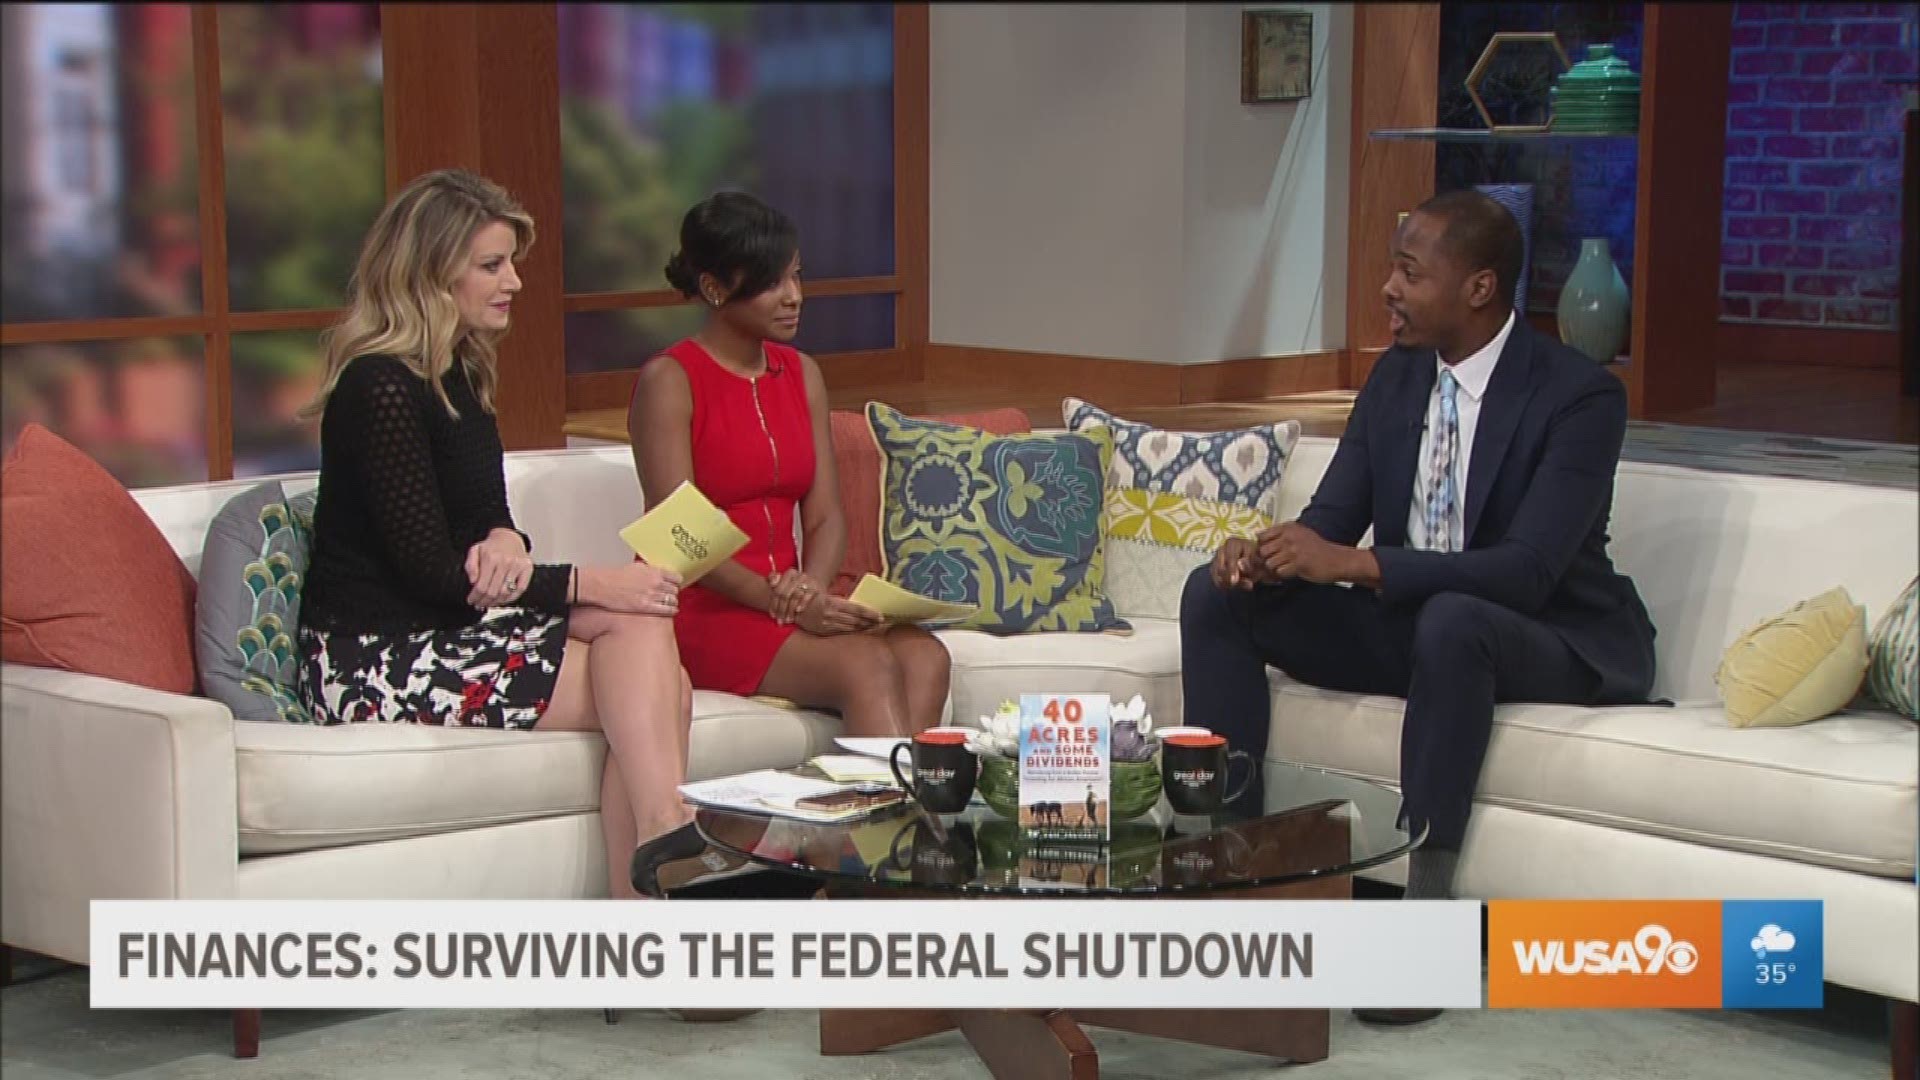 Local financial professional Tayvon Jackson from First Financial Security provides tips on how to financially survive the government shutdown.